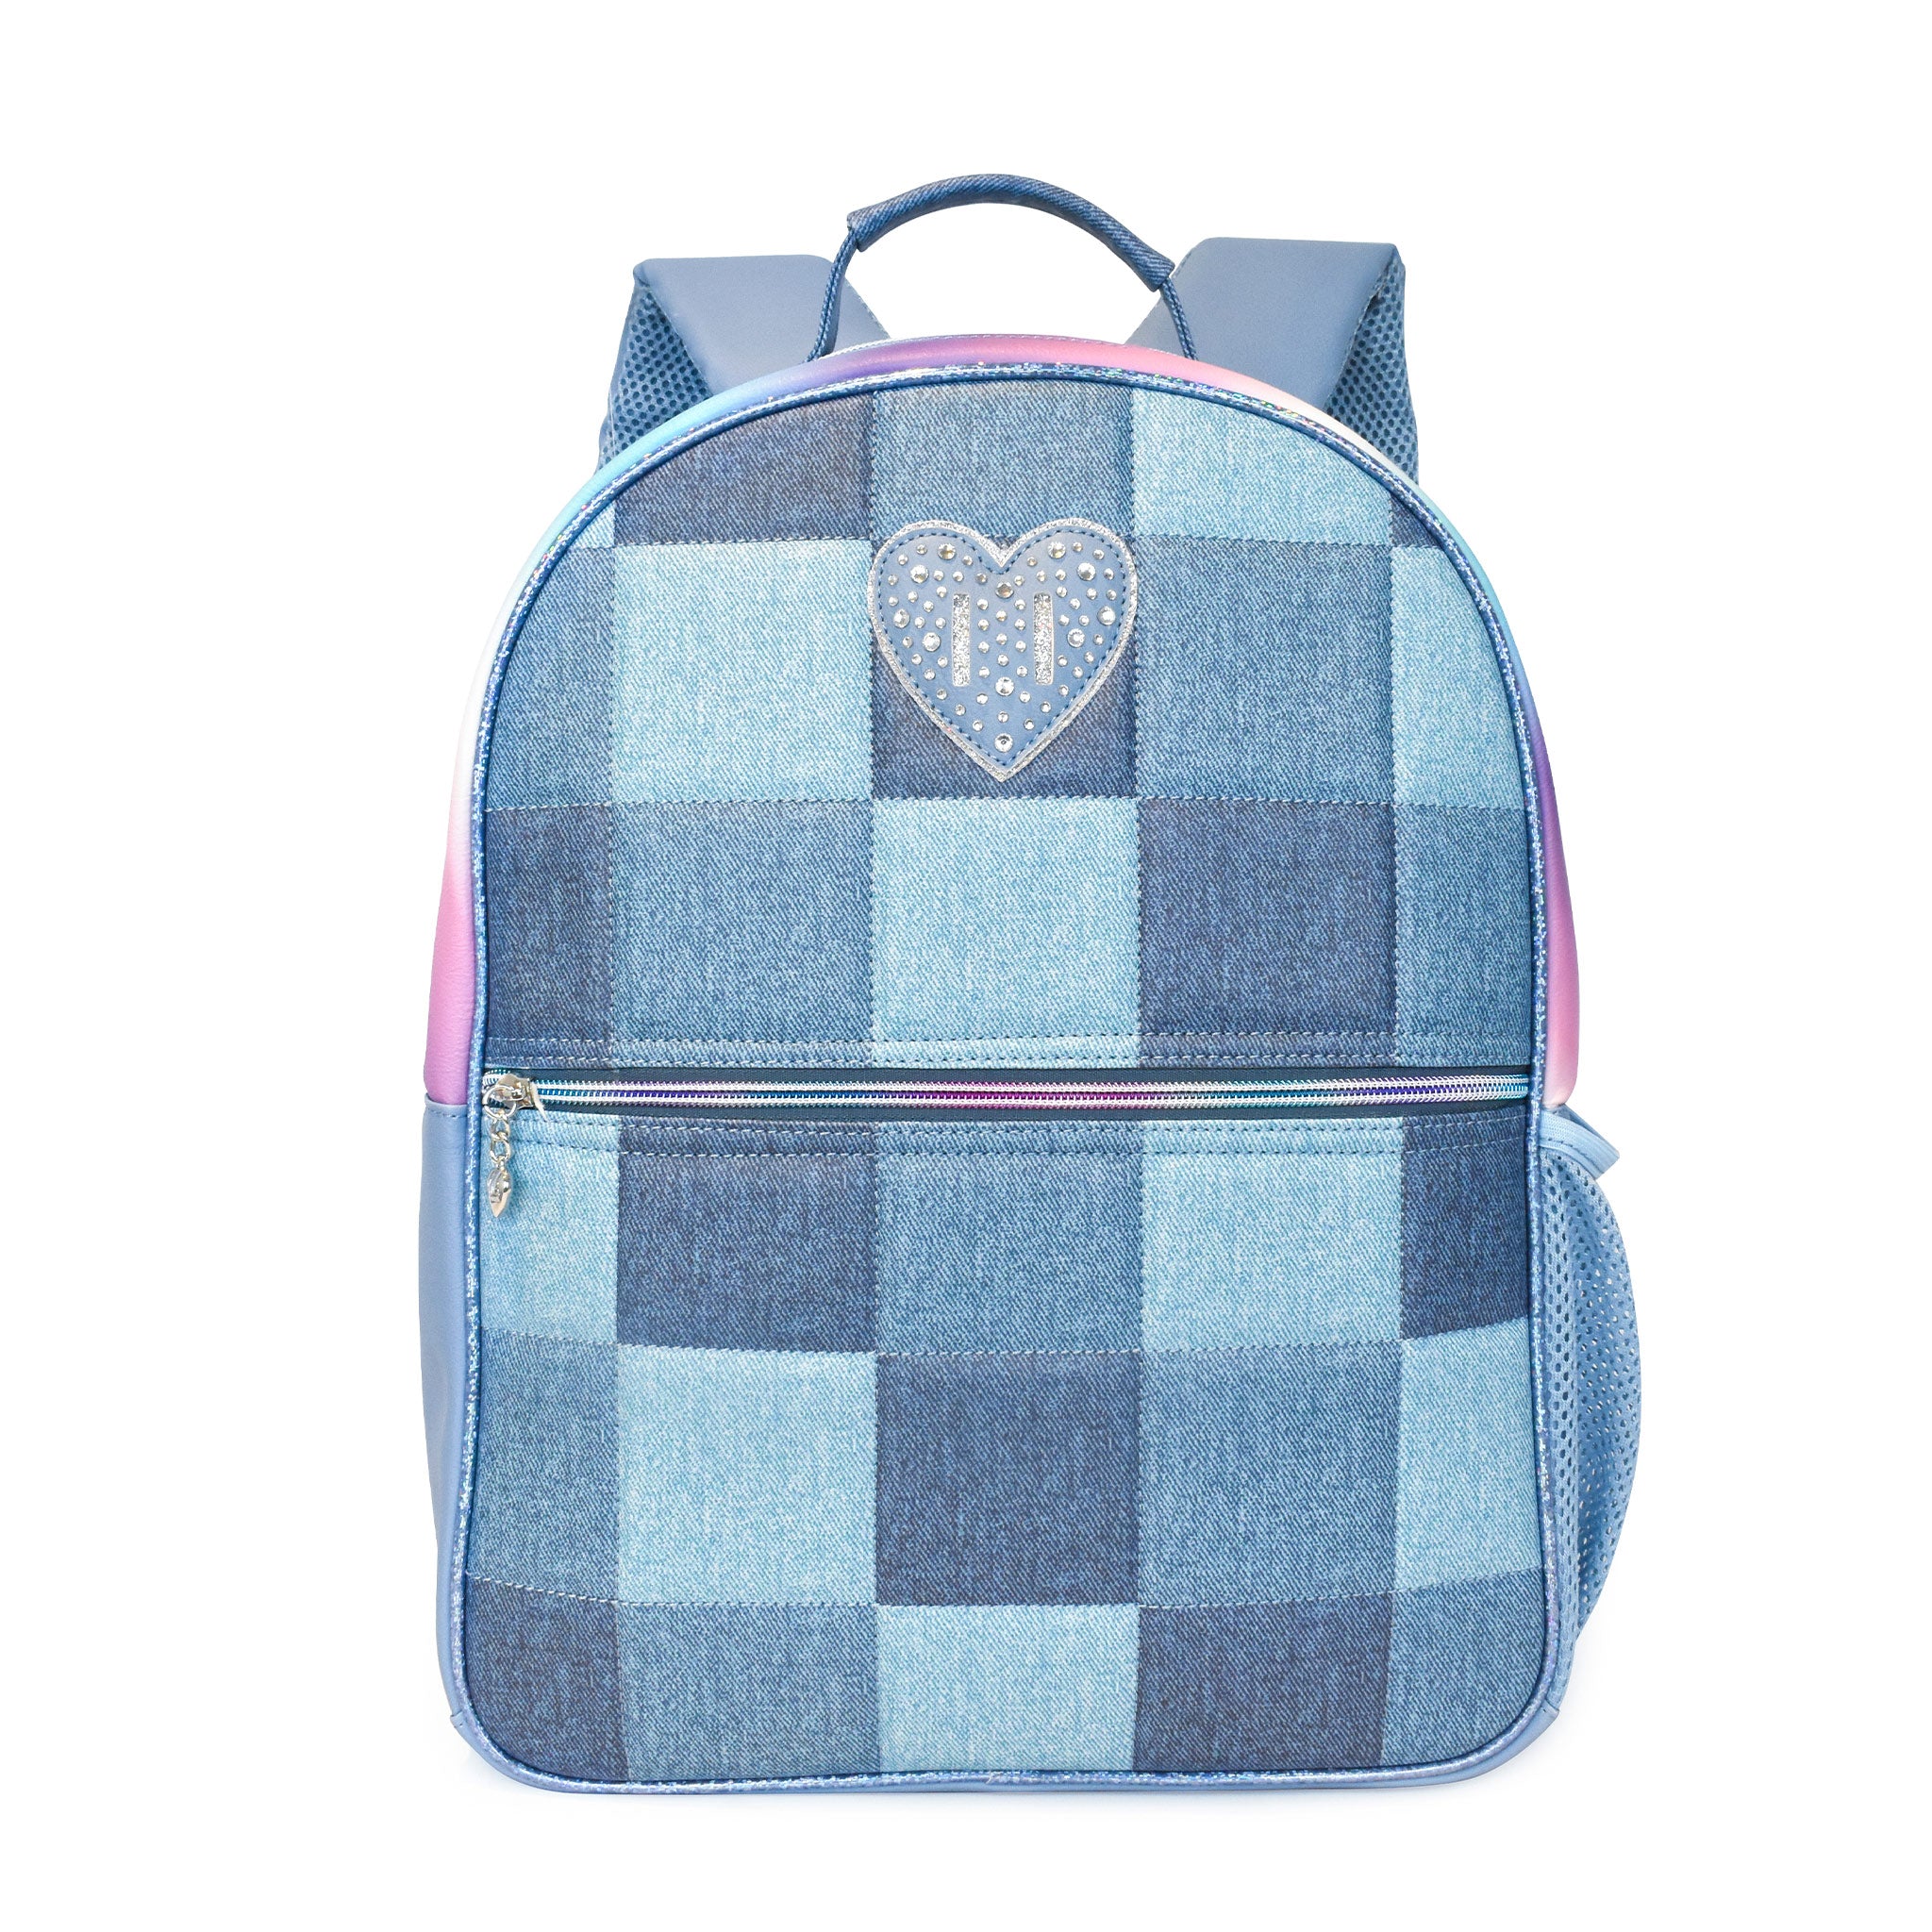 Front view of a denim checkerboard large backpack with rhinestone heart patch